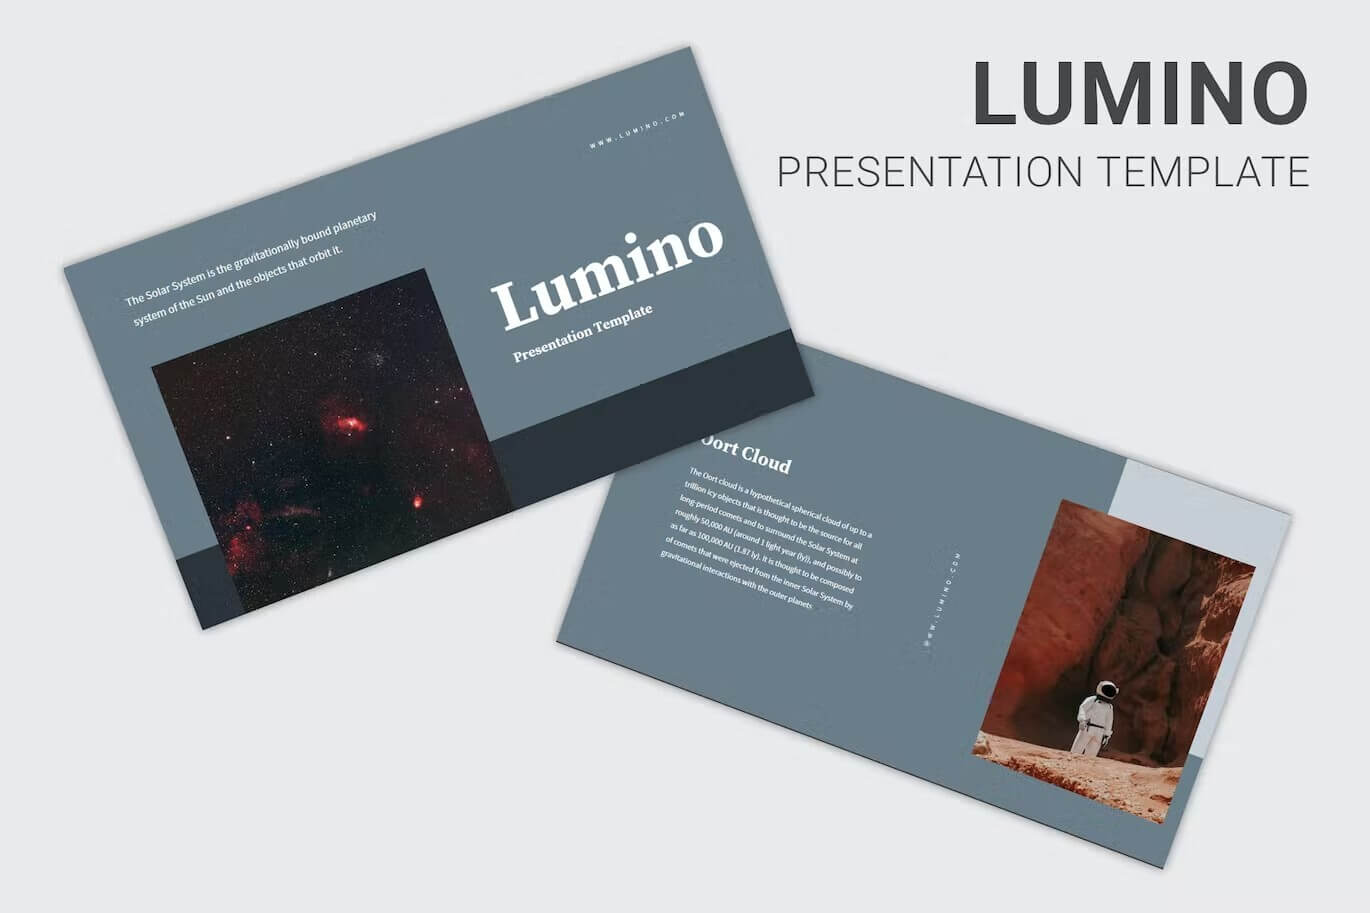 Two slides of Lumino presentation template on the blue and grey background.